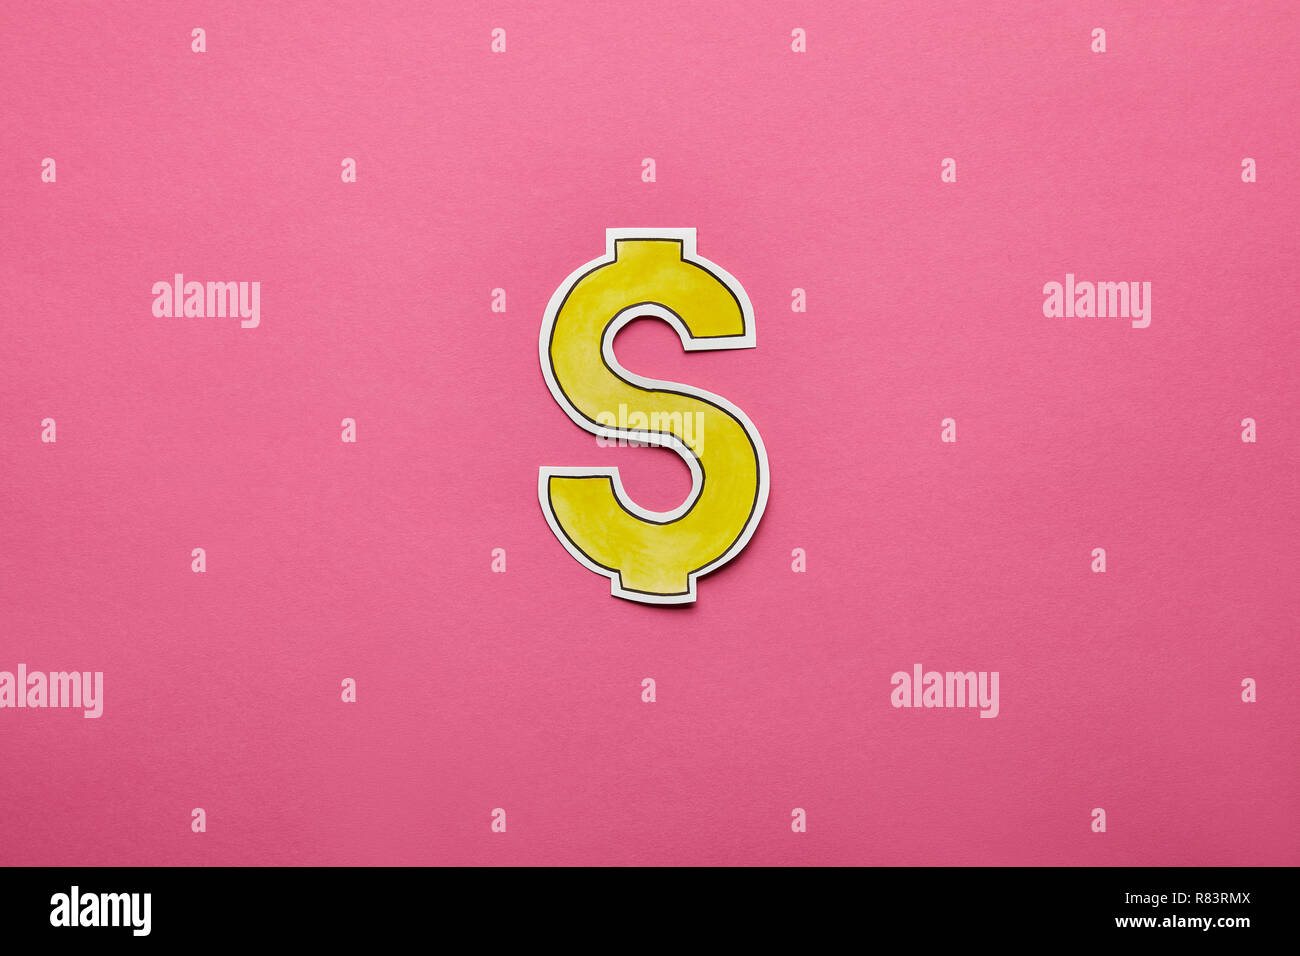 Top View Of Dollar Sign On Pink Background Stock Photo - Alamy